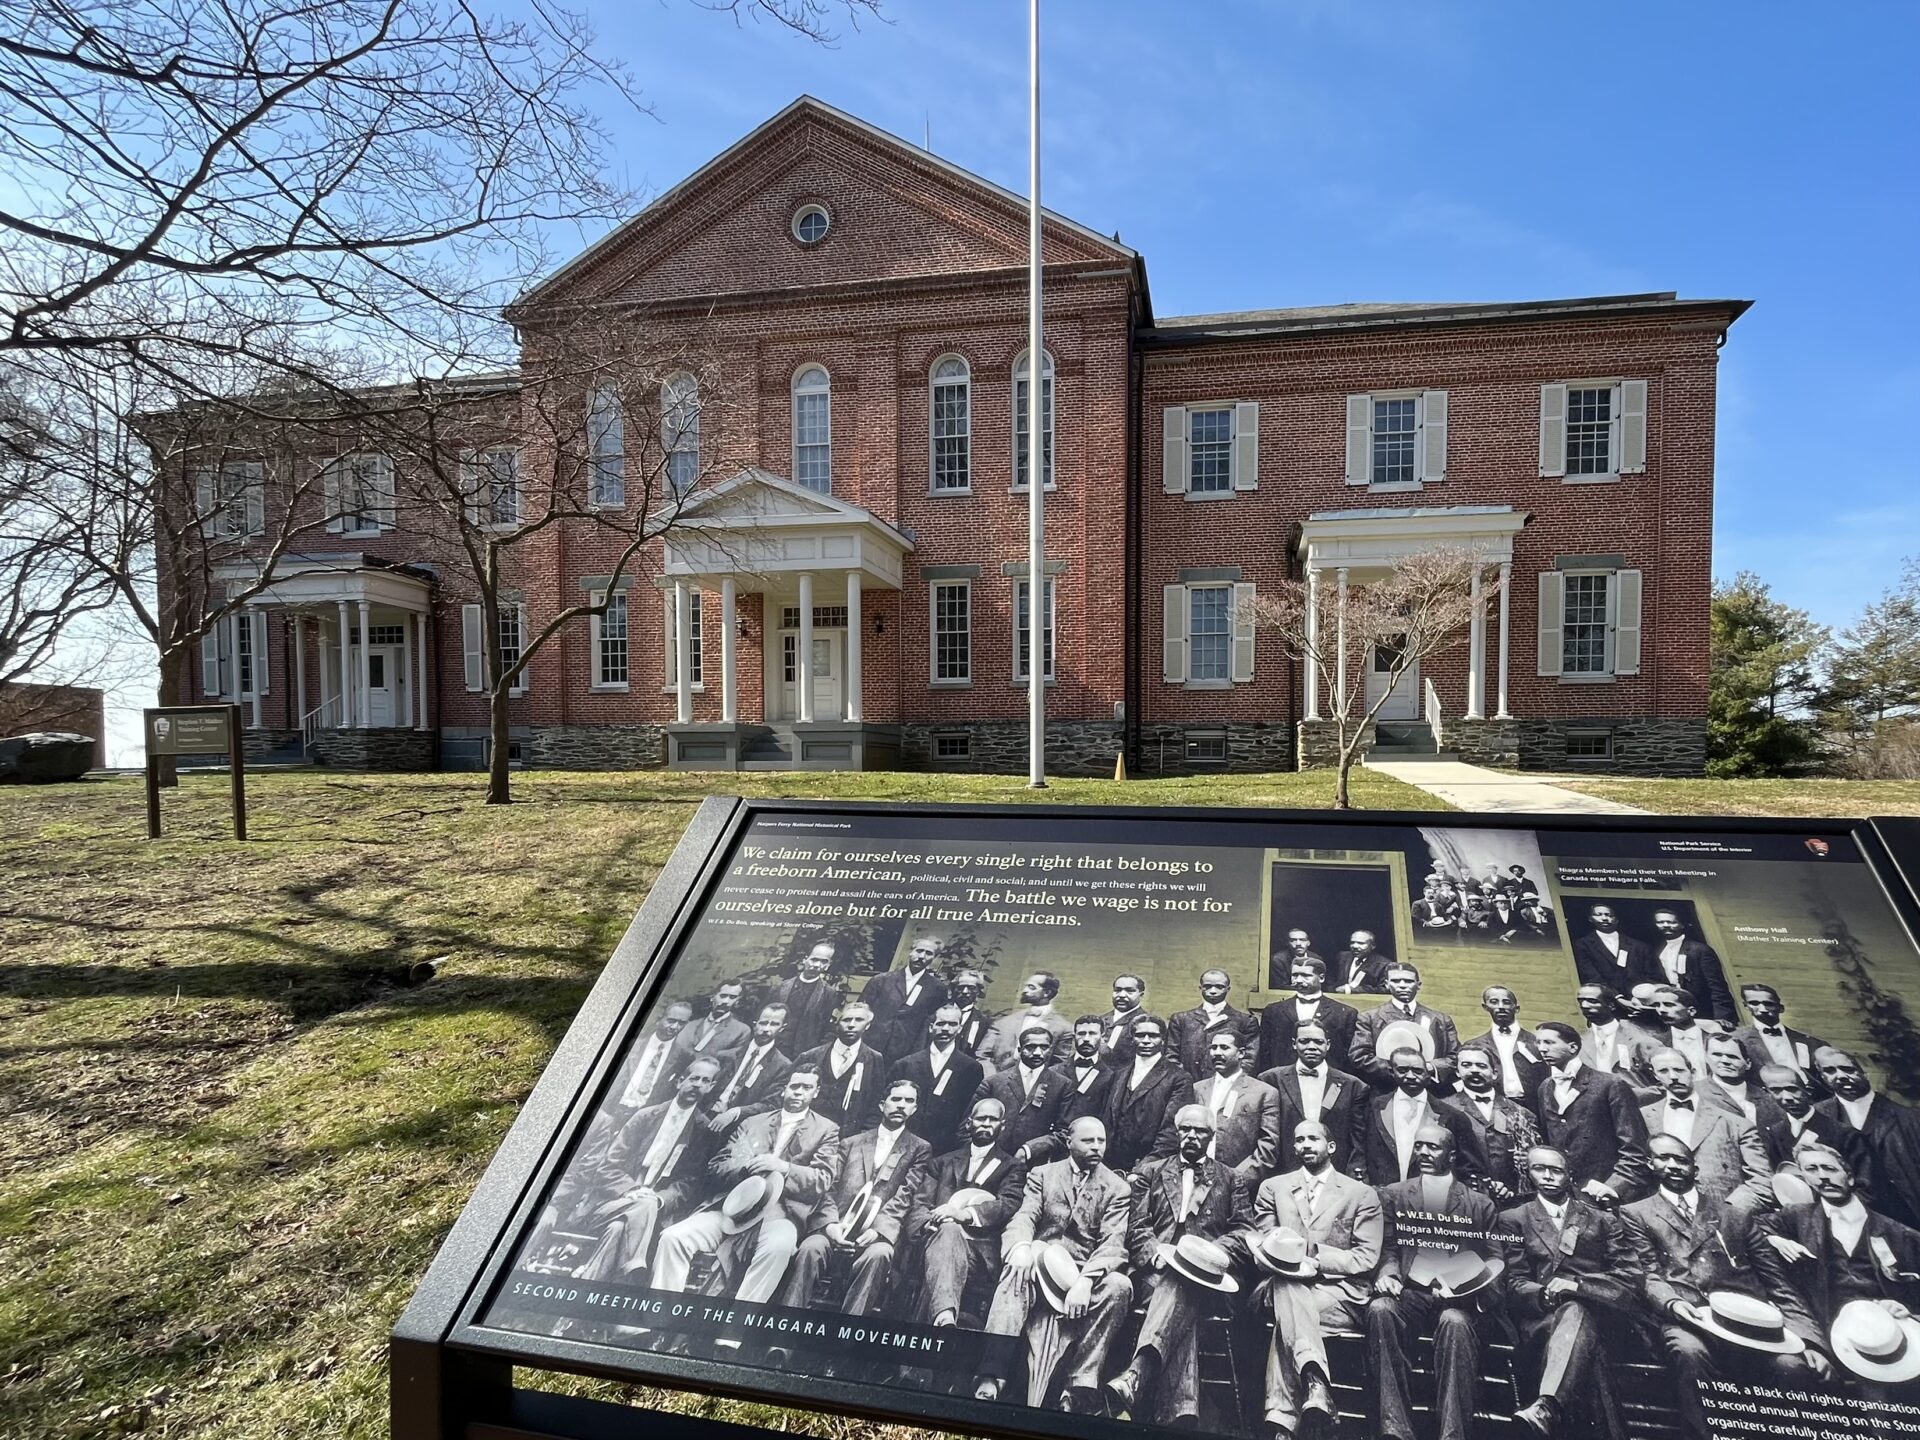 A sign displaying a photograph of participants in the second meeting of the Niagara Movement stands outside of Anthony Hall, a brick building on the campus of Storer College.